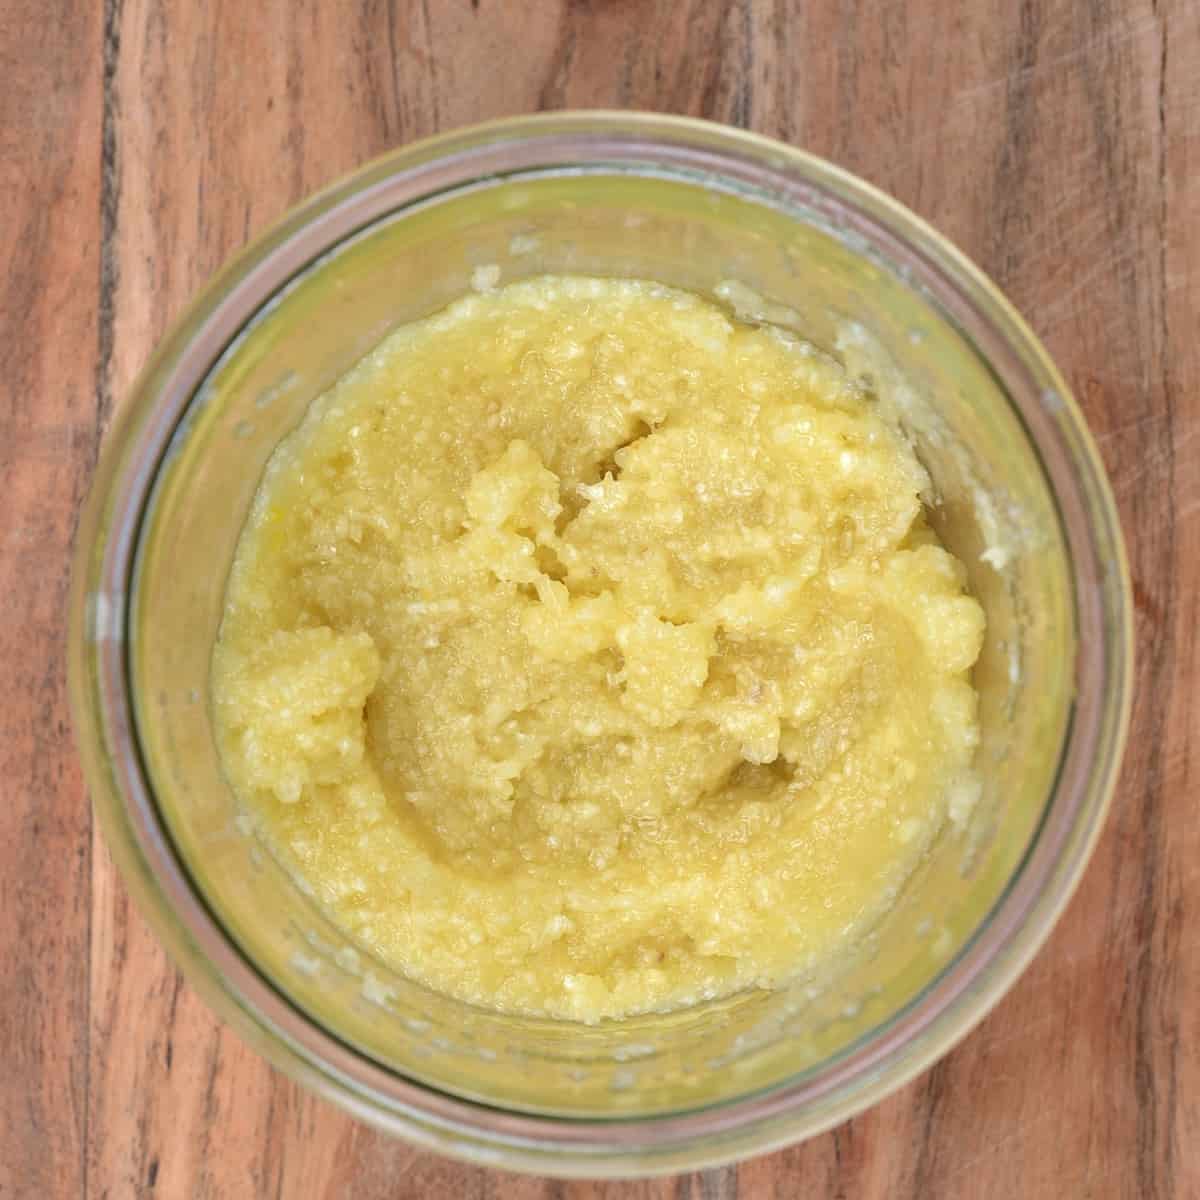 https://www.alphafoodie.com/wp-content/uploads/2021/02/How-to-make-Garlic-Paste-1-of-1.jpeg